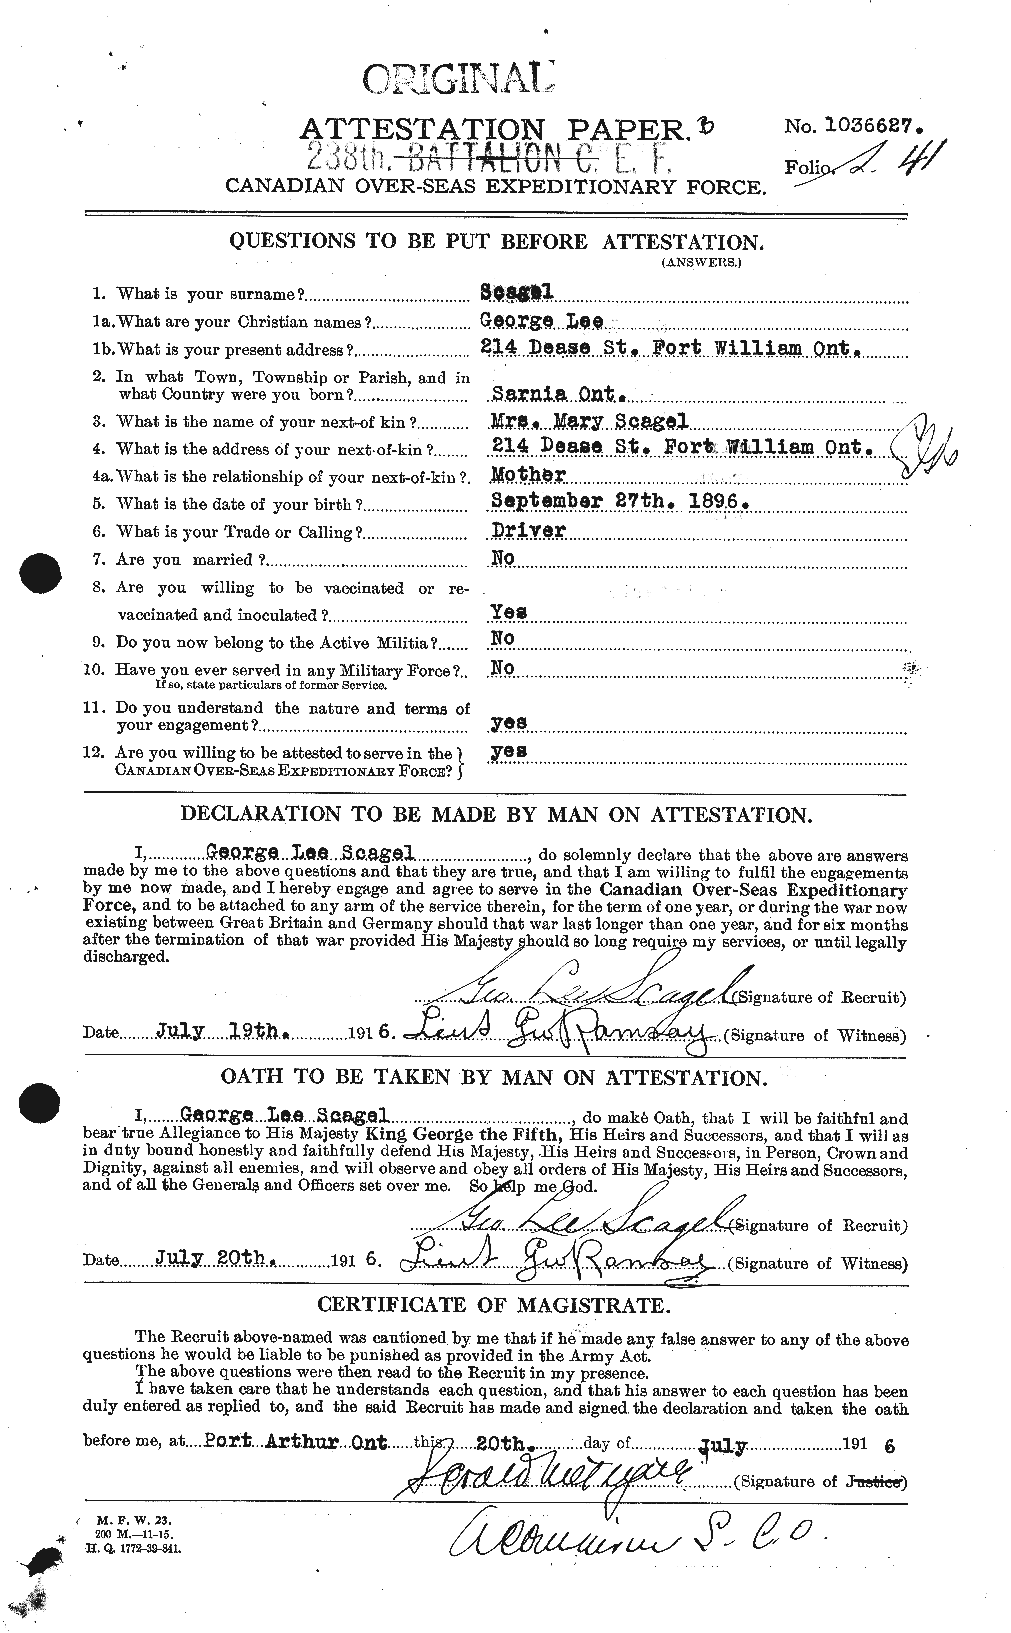 Personnel Records of the First World War - CEF 081878a